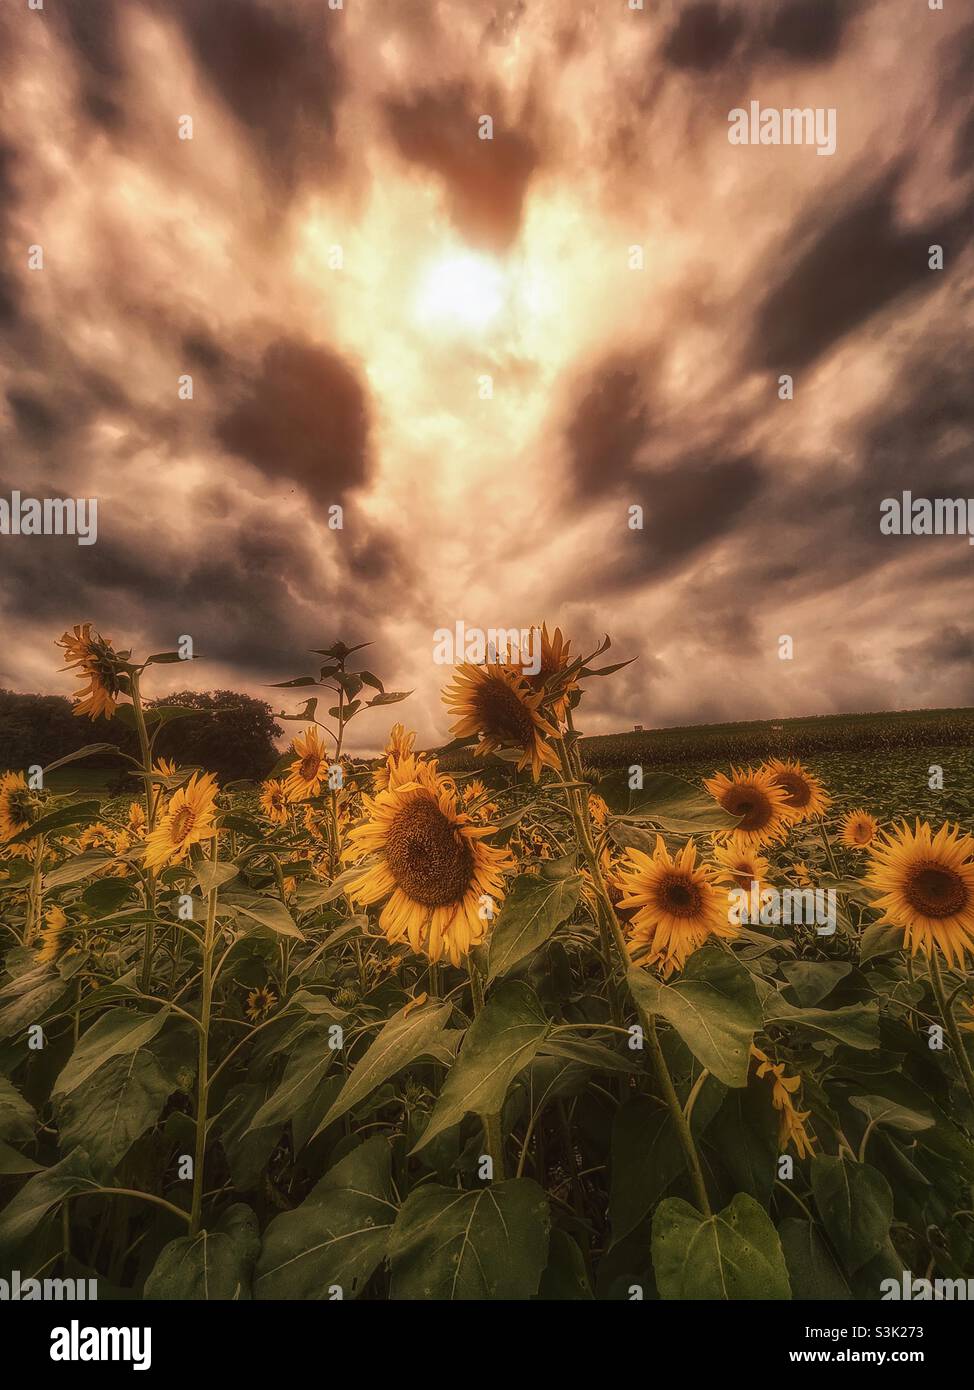 Field of sunflowers under a dramatic sky Stock Photo